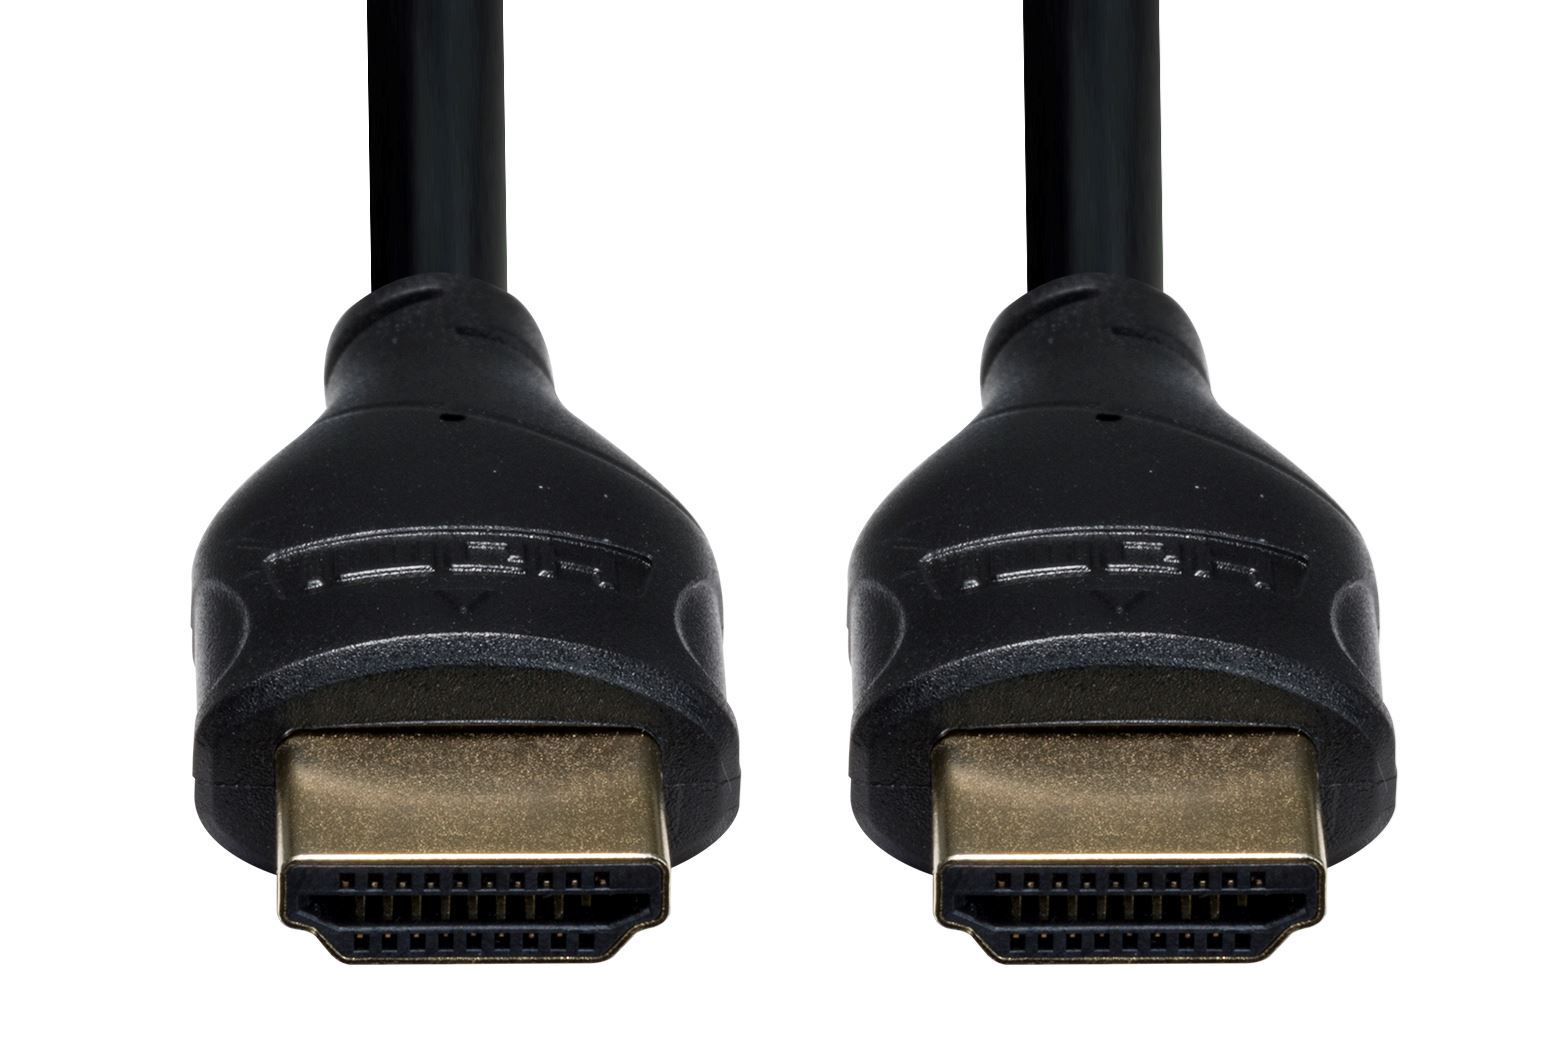 DYNAMIX_0.3m_HDMI_10Gbs_Slimline_High-Speed_Cable_with_Ethernet._Max_Res:_4K2K@24/30Hz_(3840x2160)_8_Audio_channels._8bit_colour_depth._Supports_CEC,_3D,_ARC,_Ethernet. 866